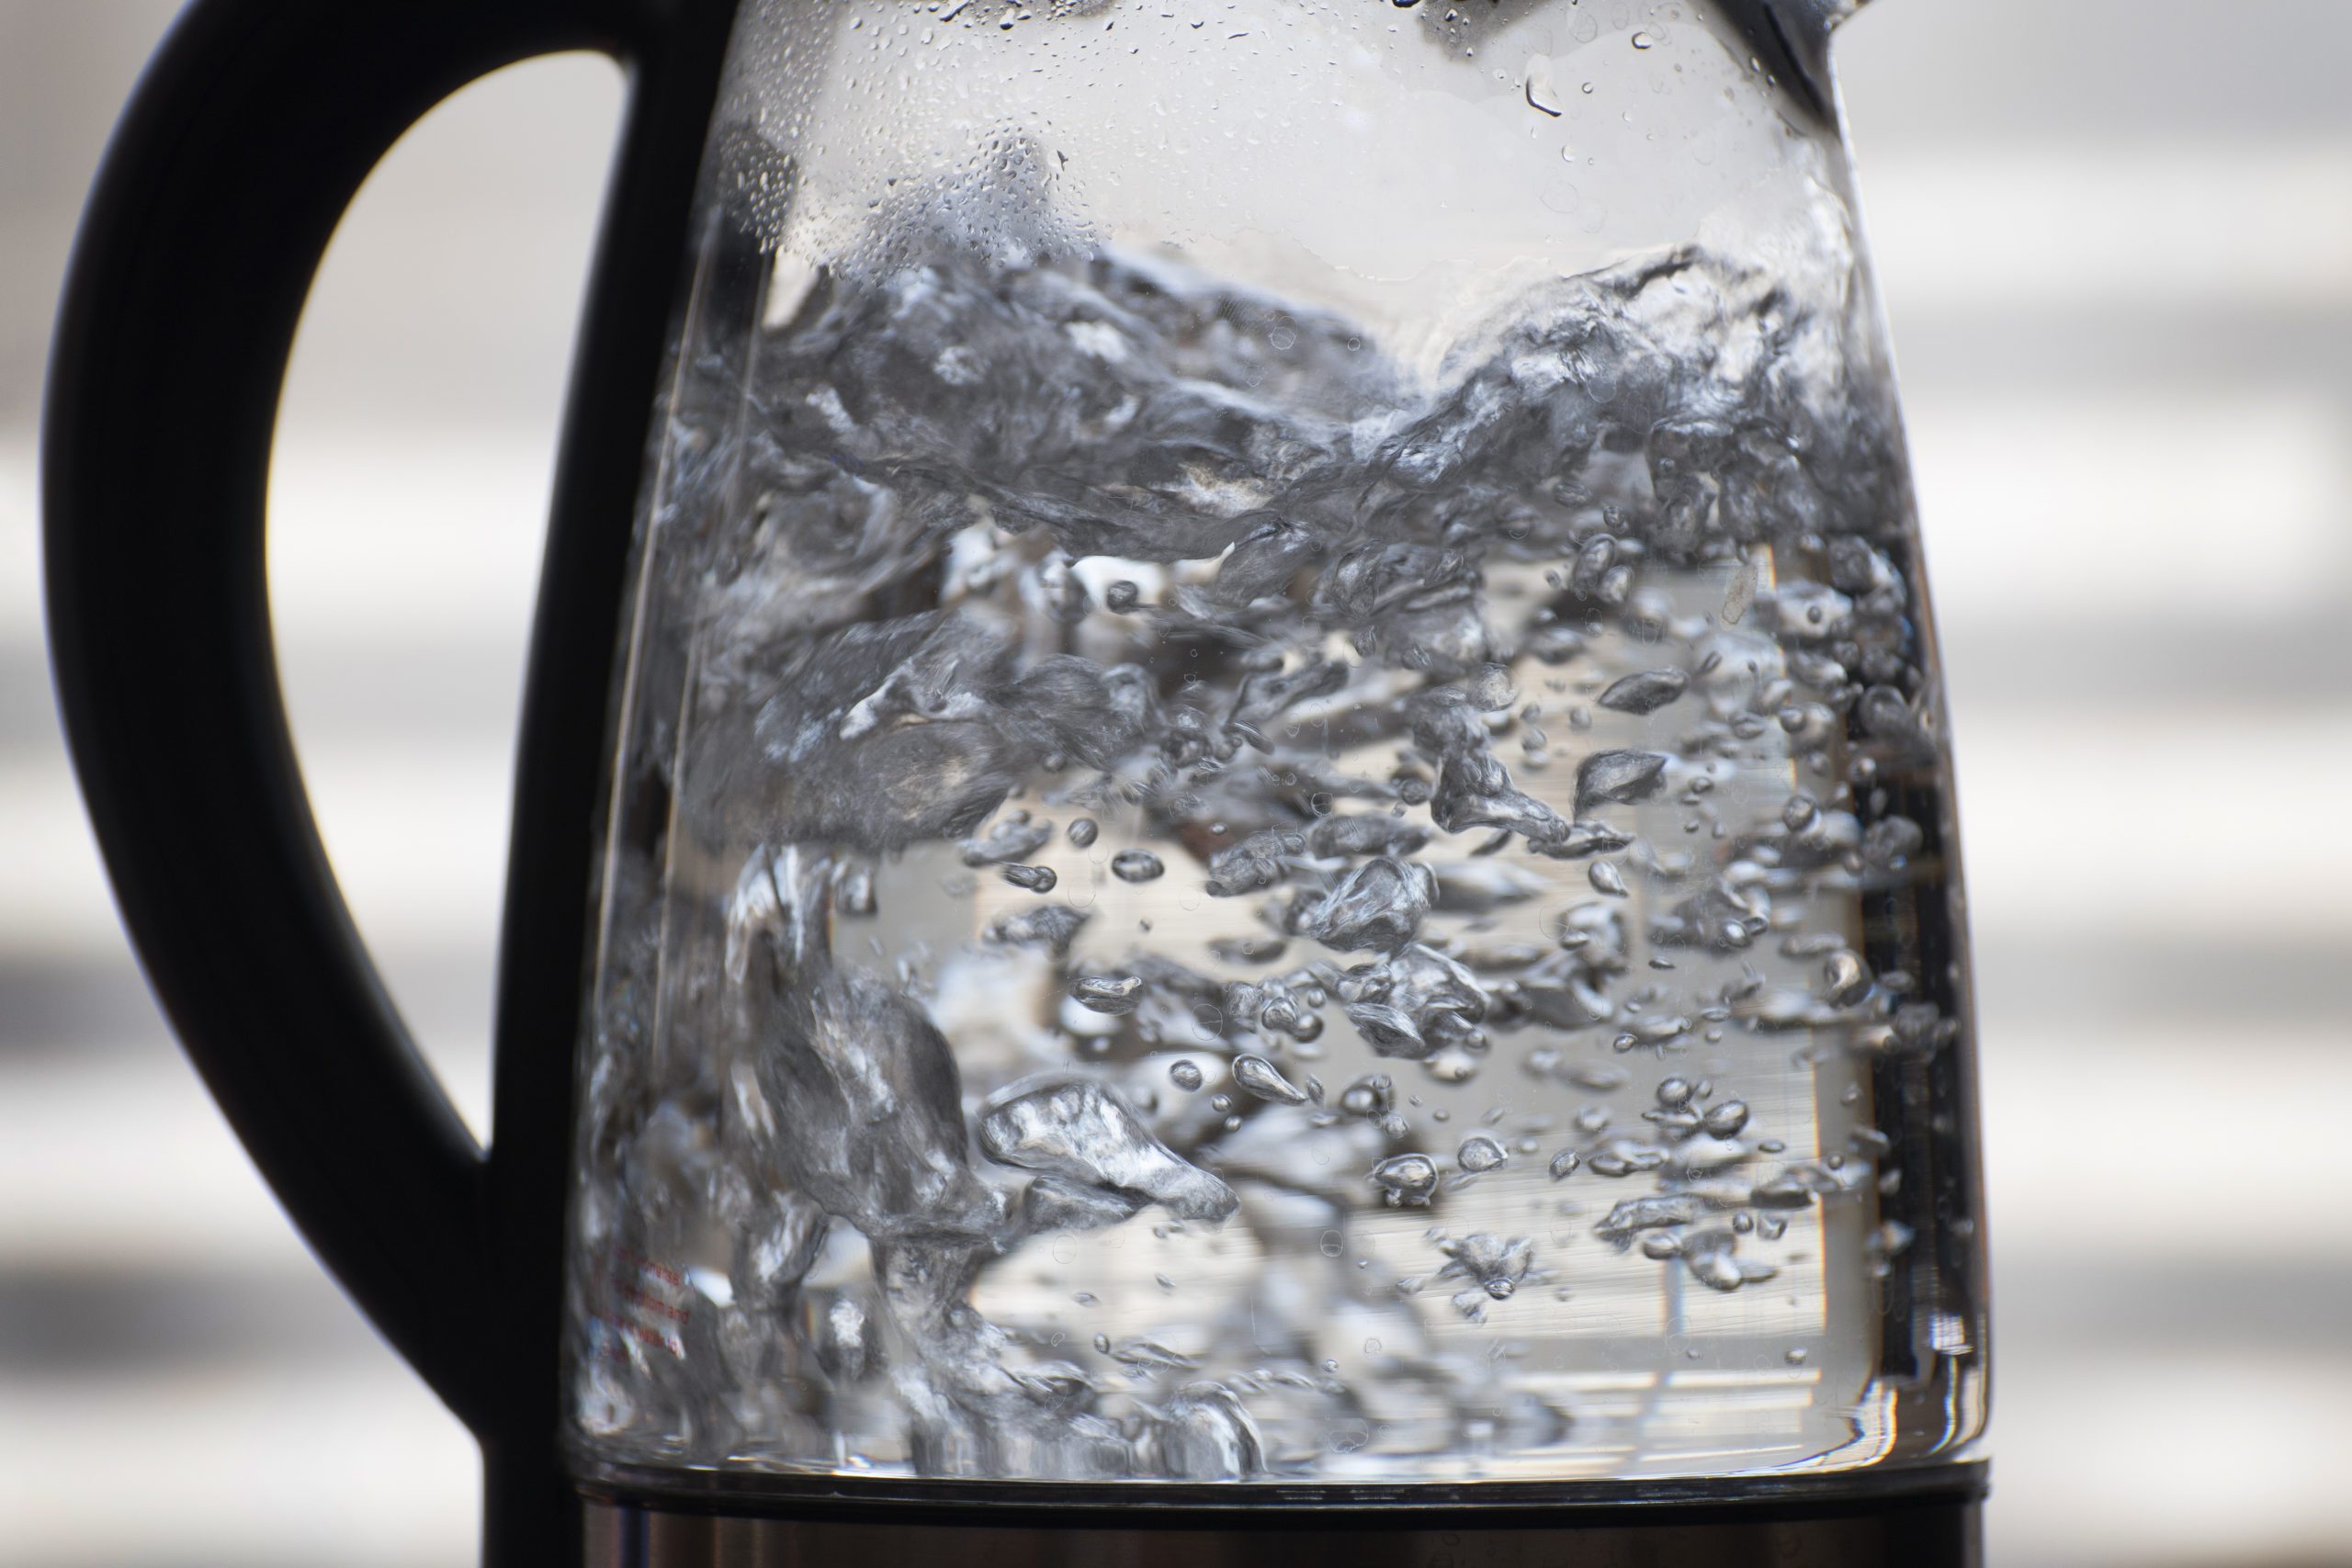 Local City Issues Precautionary Boil Water Notice